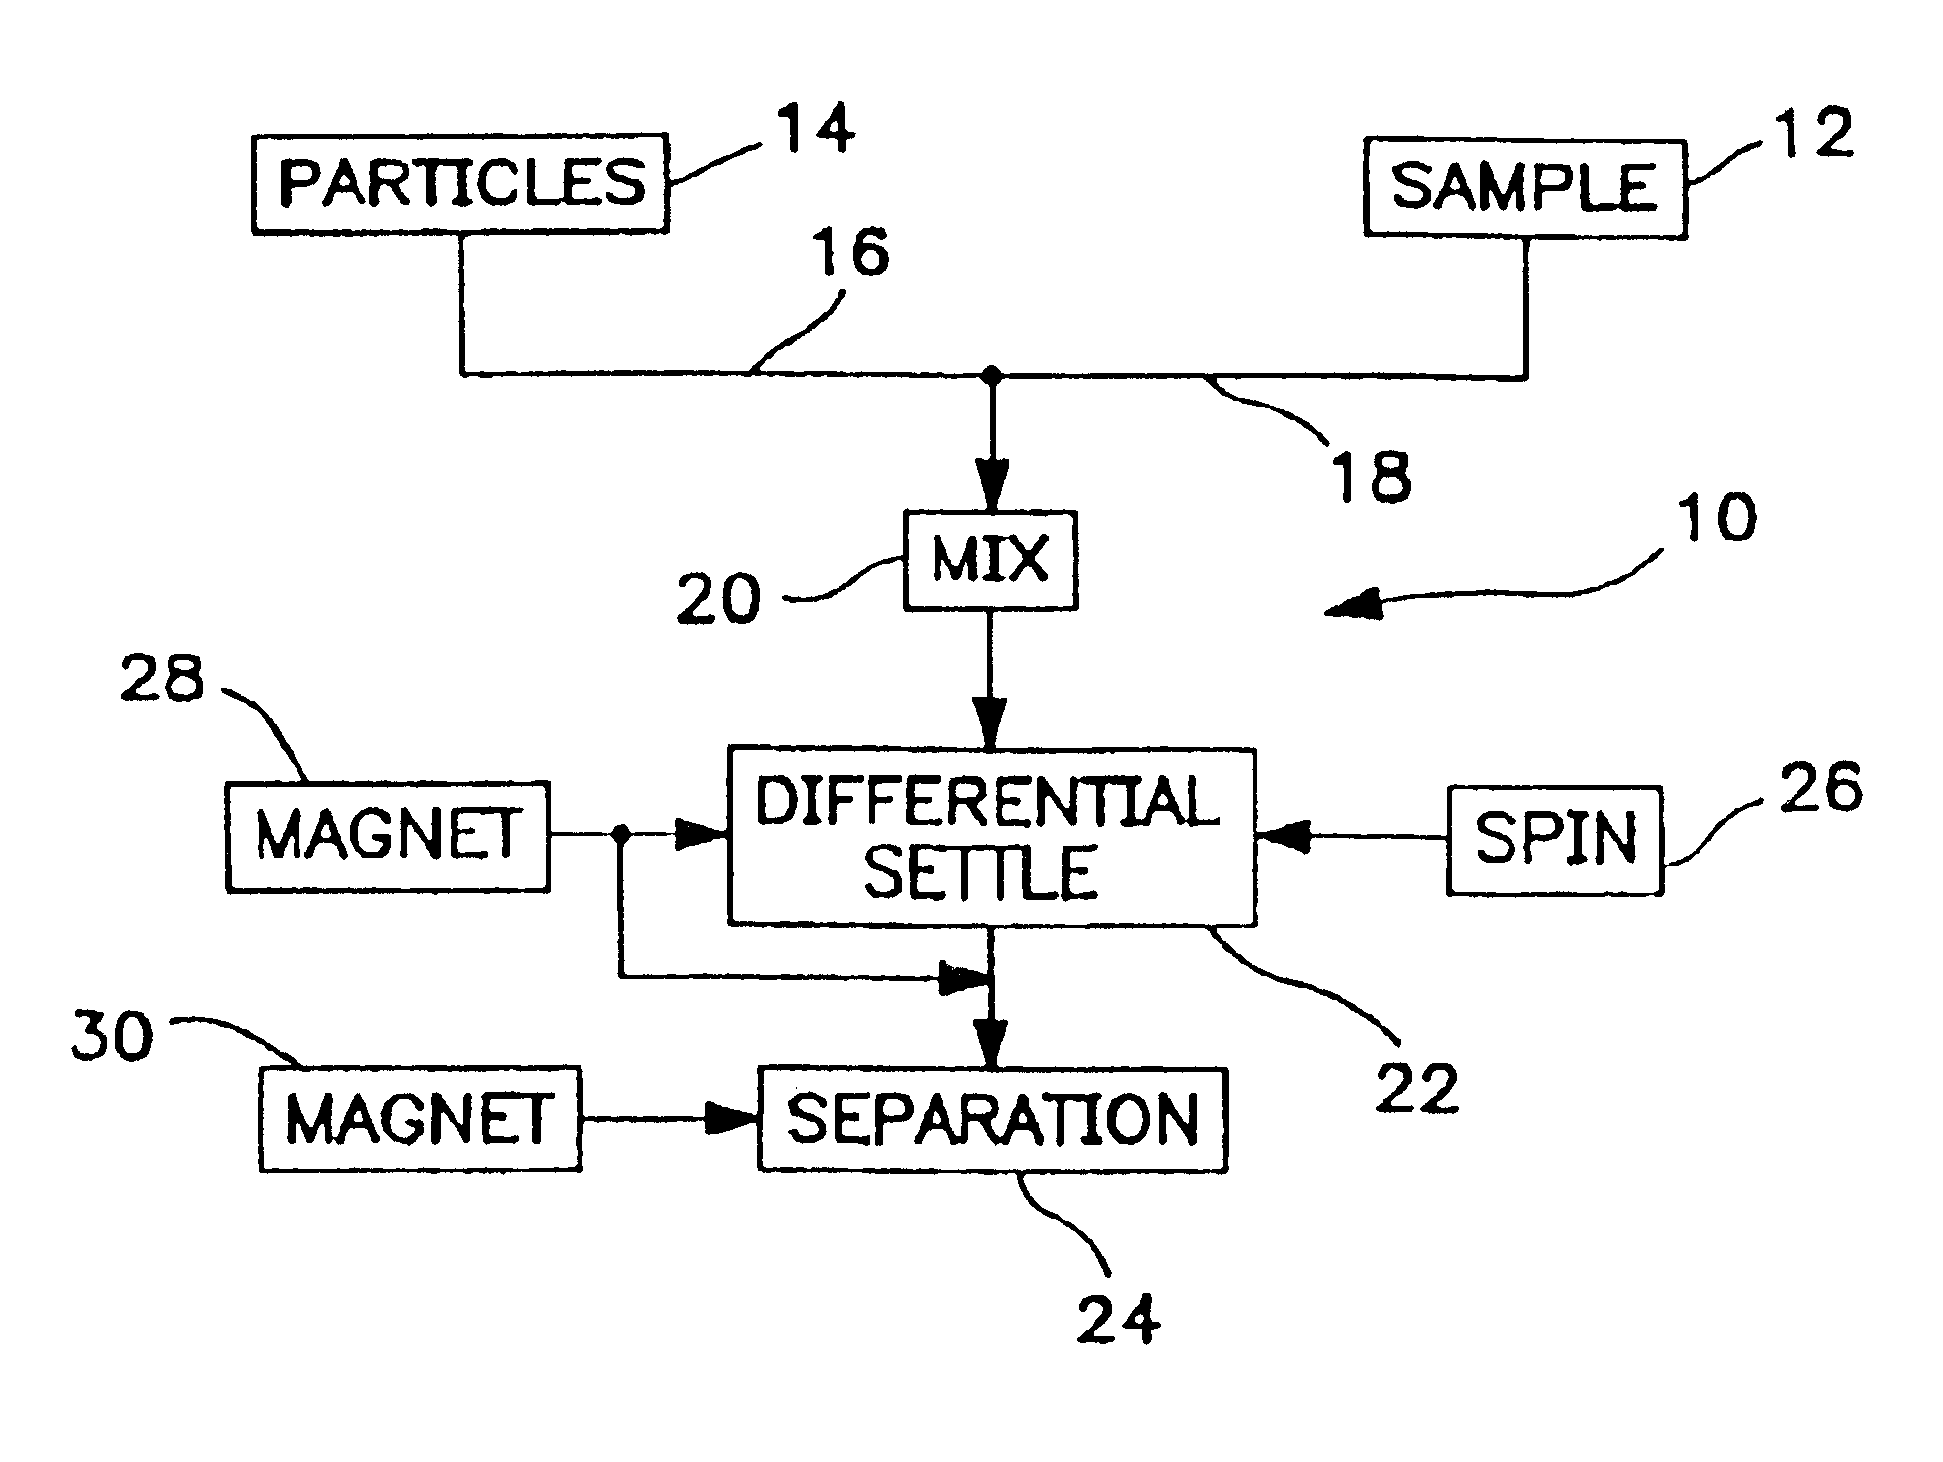 Method of selection of a population or subpopulation of a sample utilizing particles and gravity sedimentation